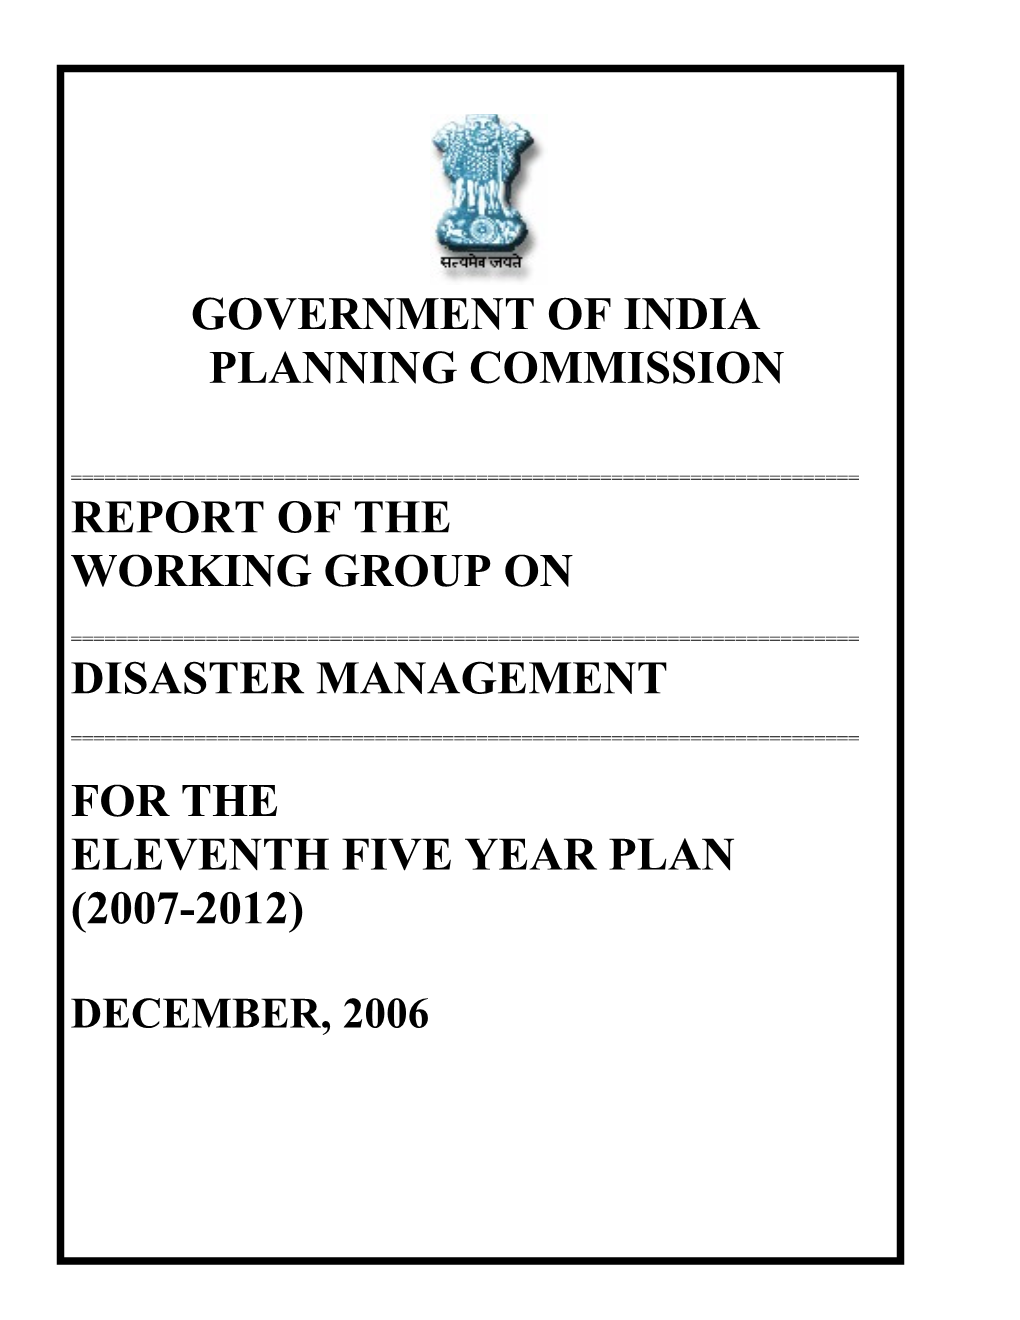 Report of the Working Group on Disaster Management Set up by the Planning Commission